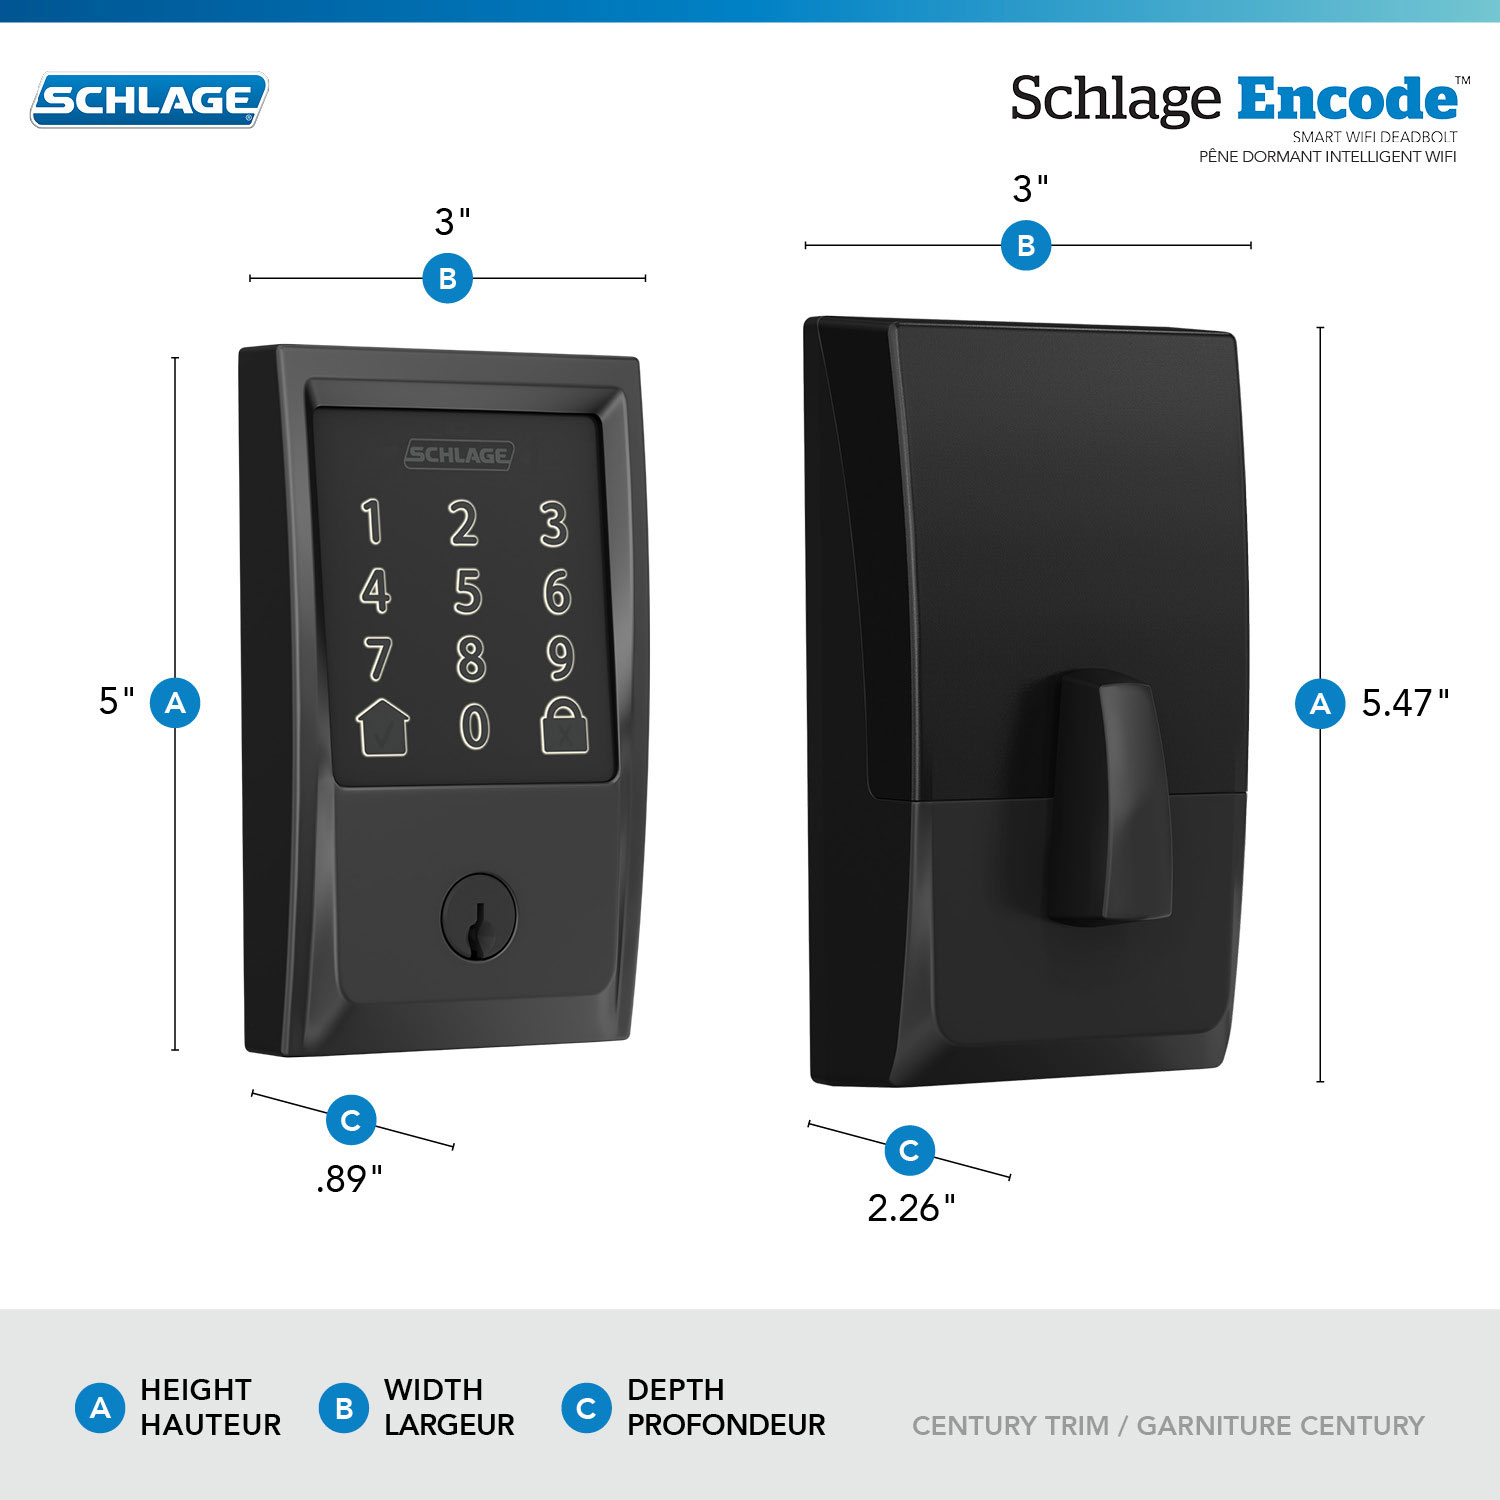 SCHLAGE Encode Satin Brass 1-Cylinder Touch Screen Electronic Deadlock  201200